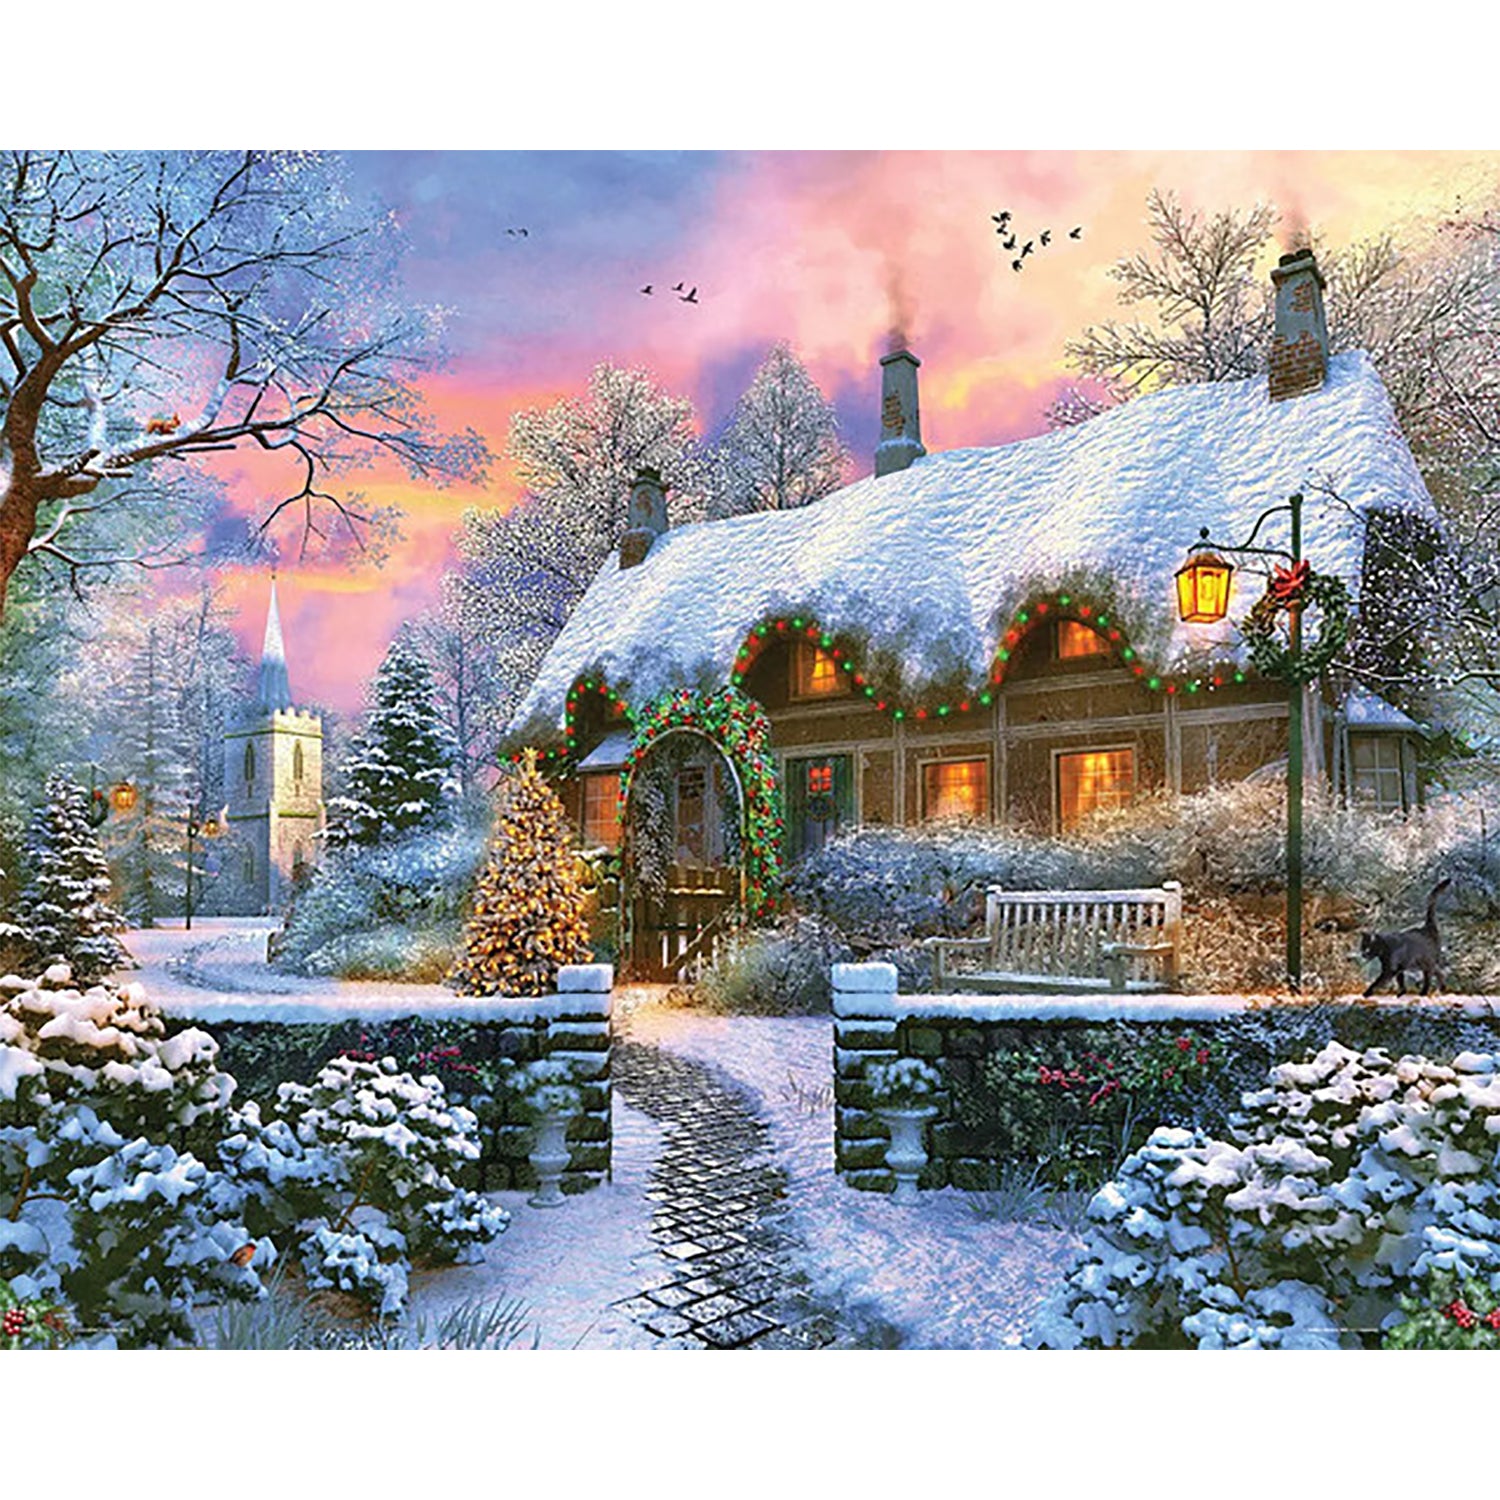 Lake Tahoe Winter 125 Piece Small Wooden Jigsaw Puzzle | Zen Puzzles